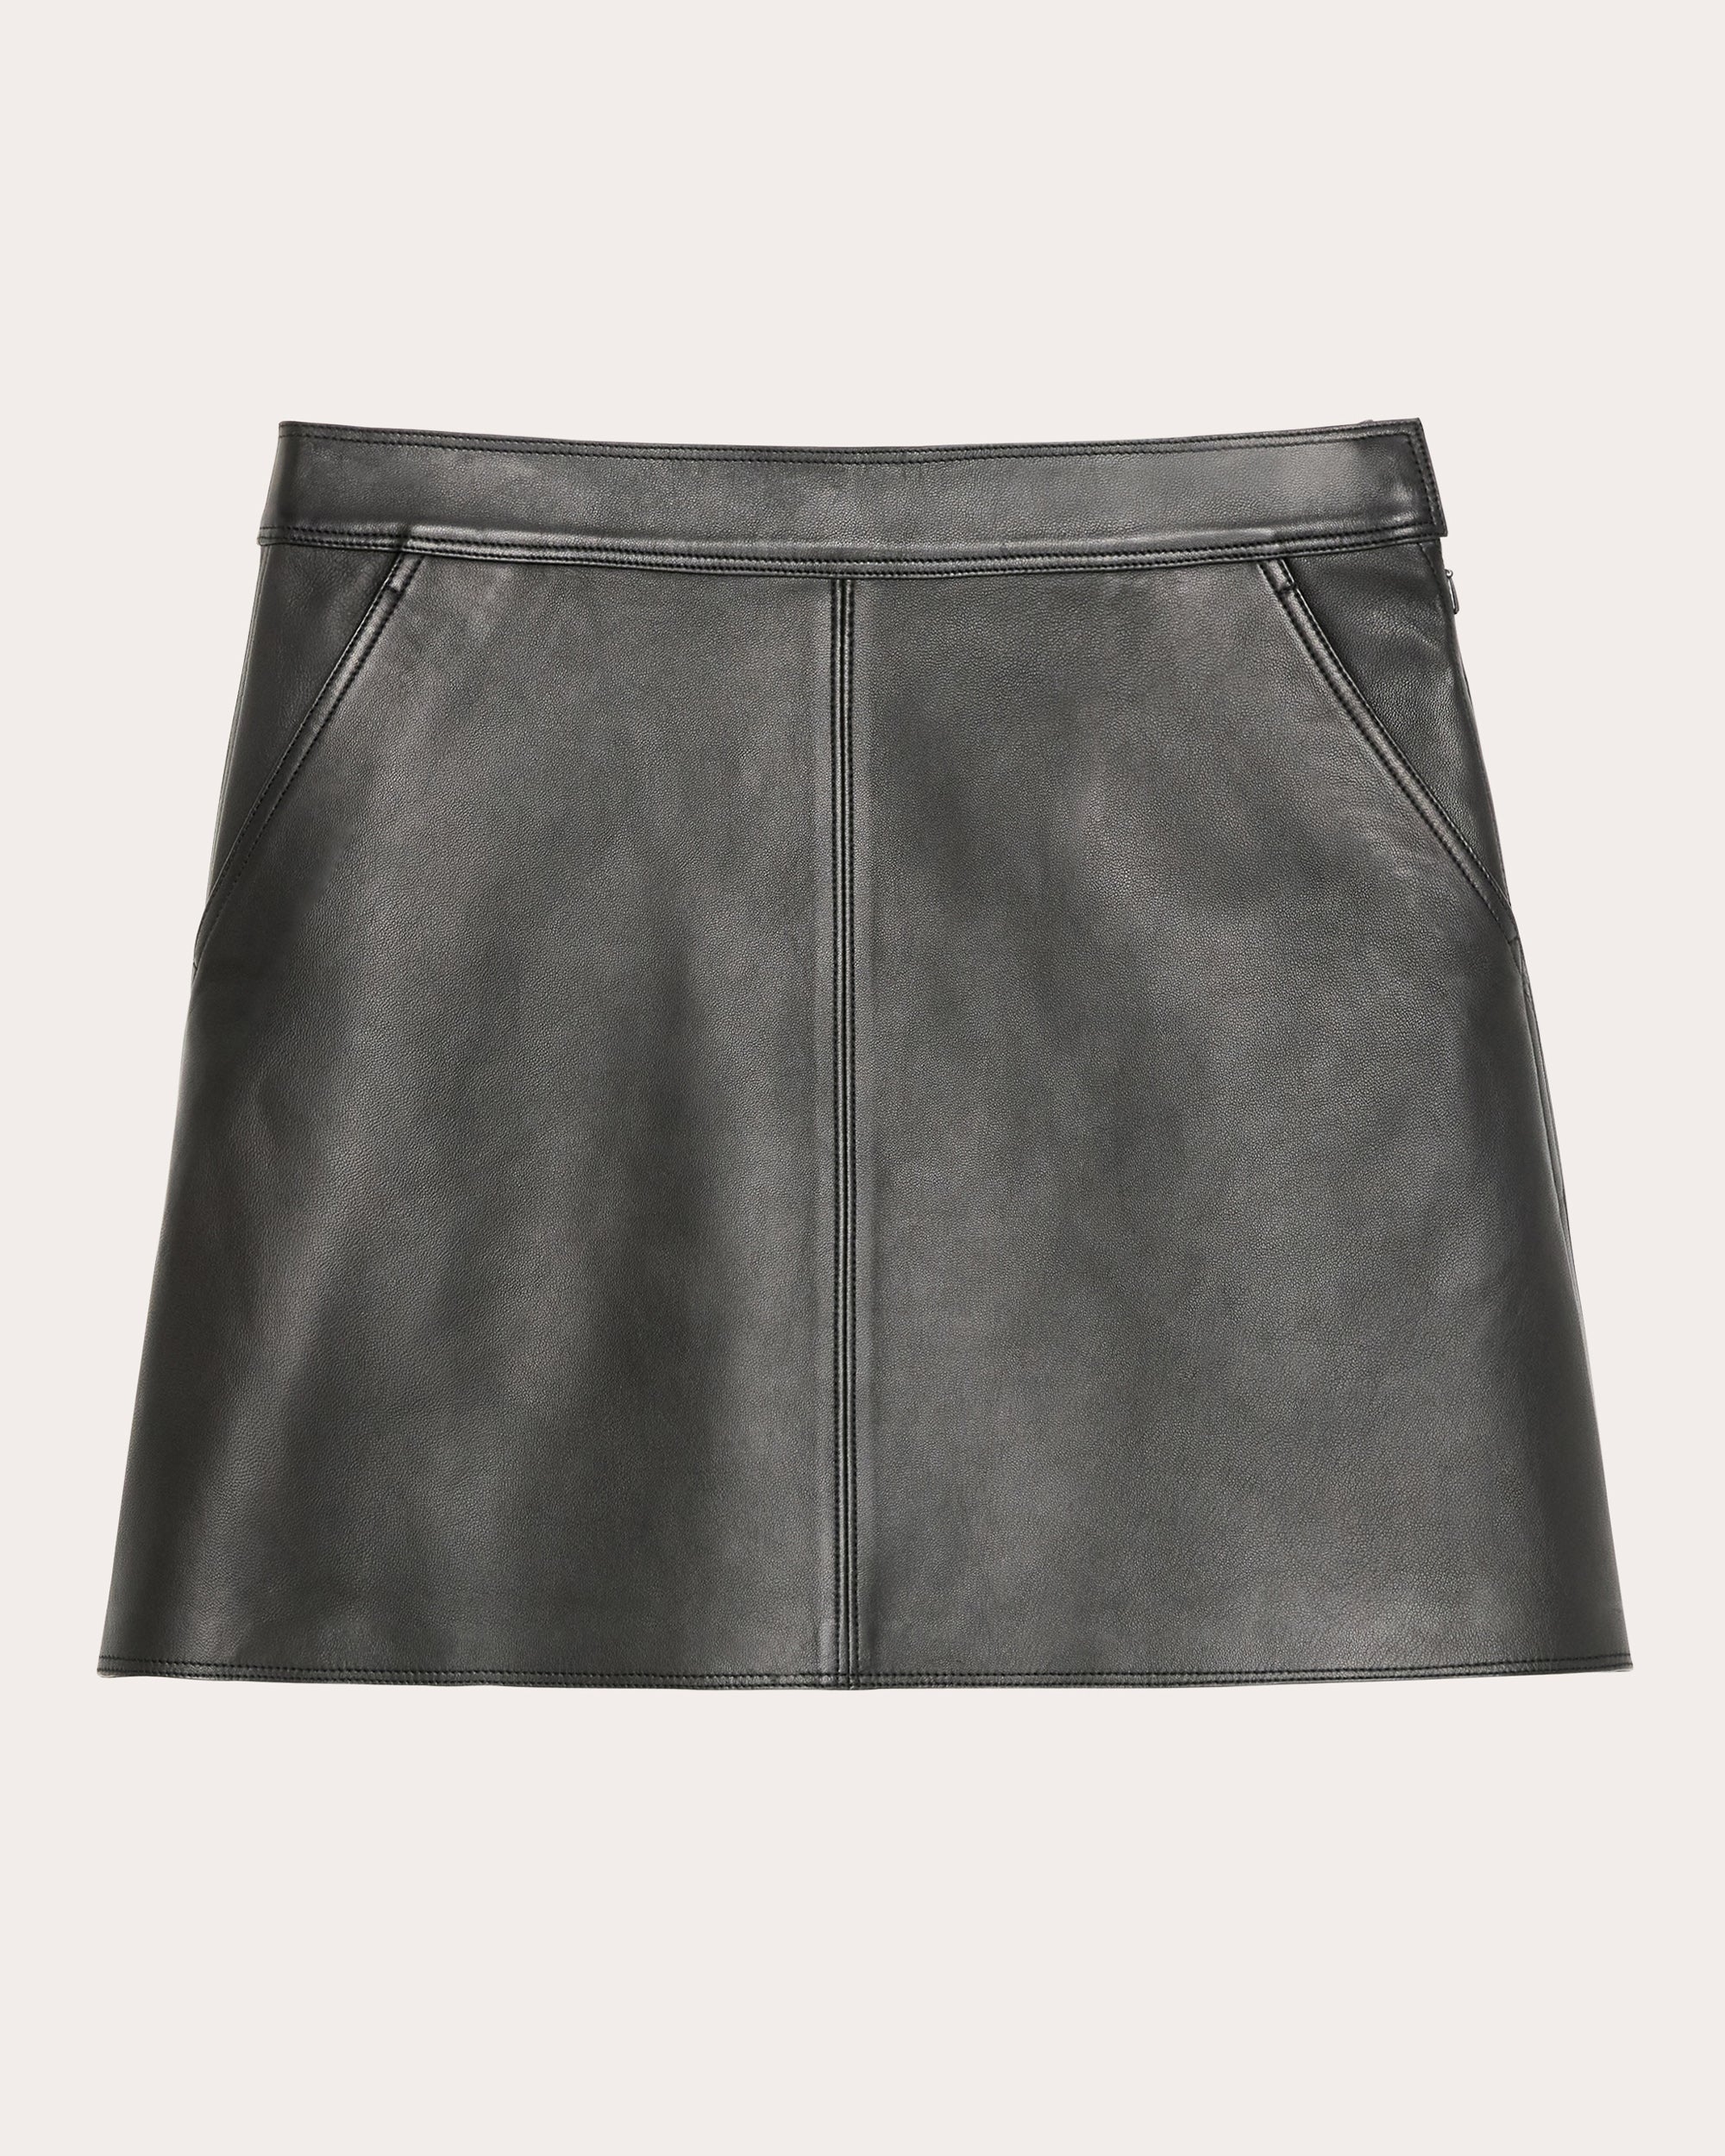 THEORY WOMEN'S LEATHER A-LINE MINI SKIRT